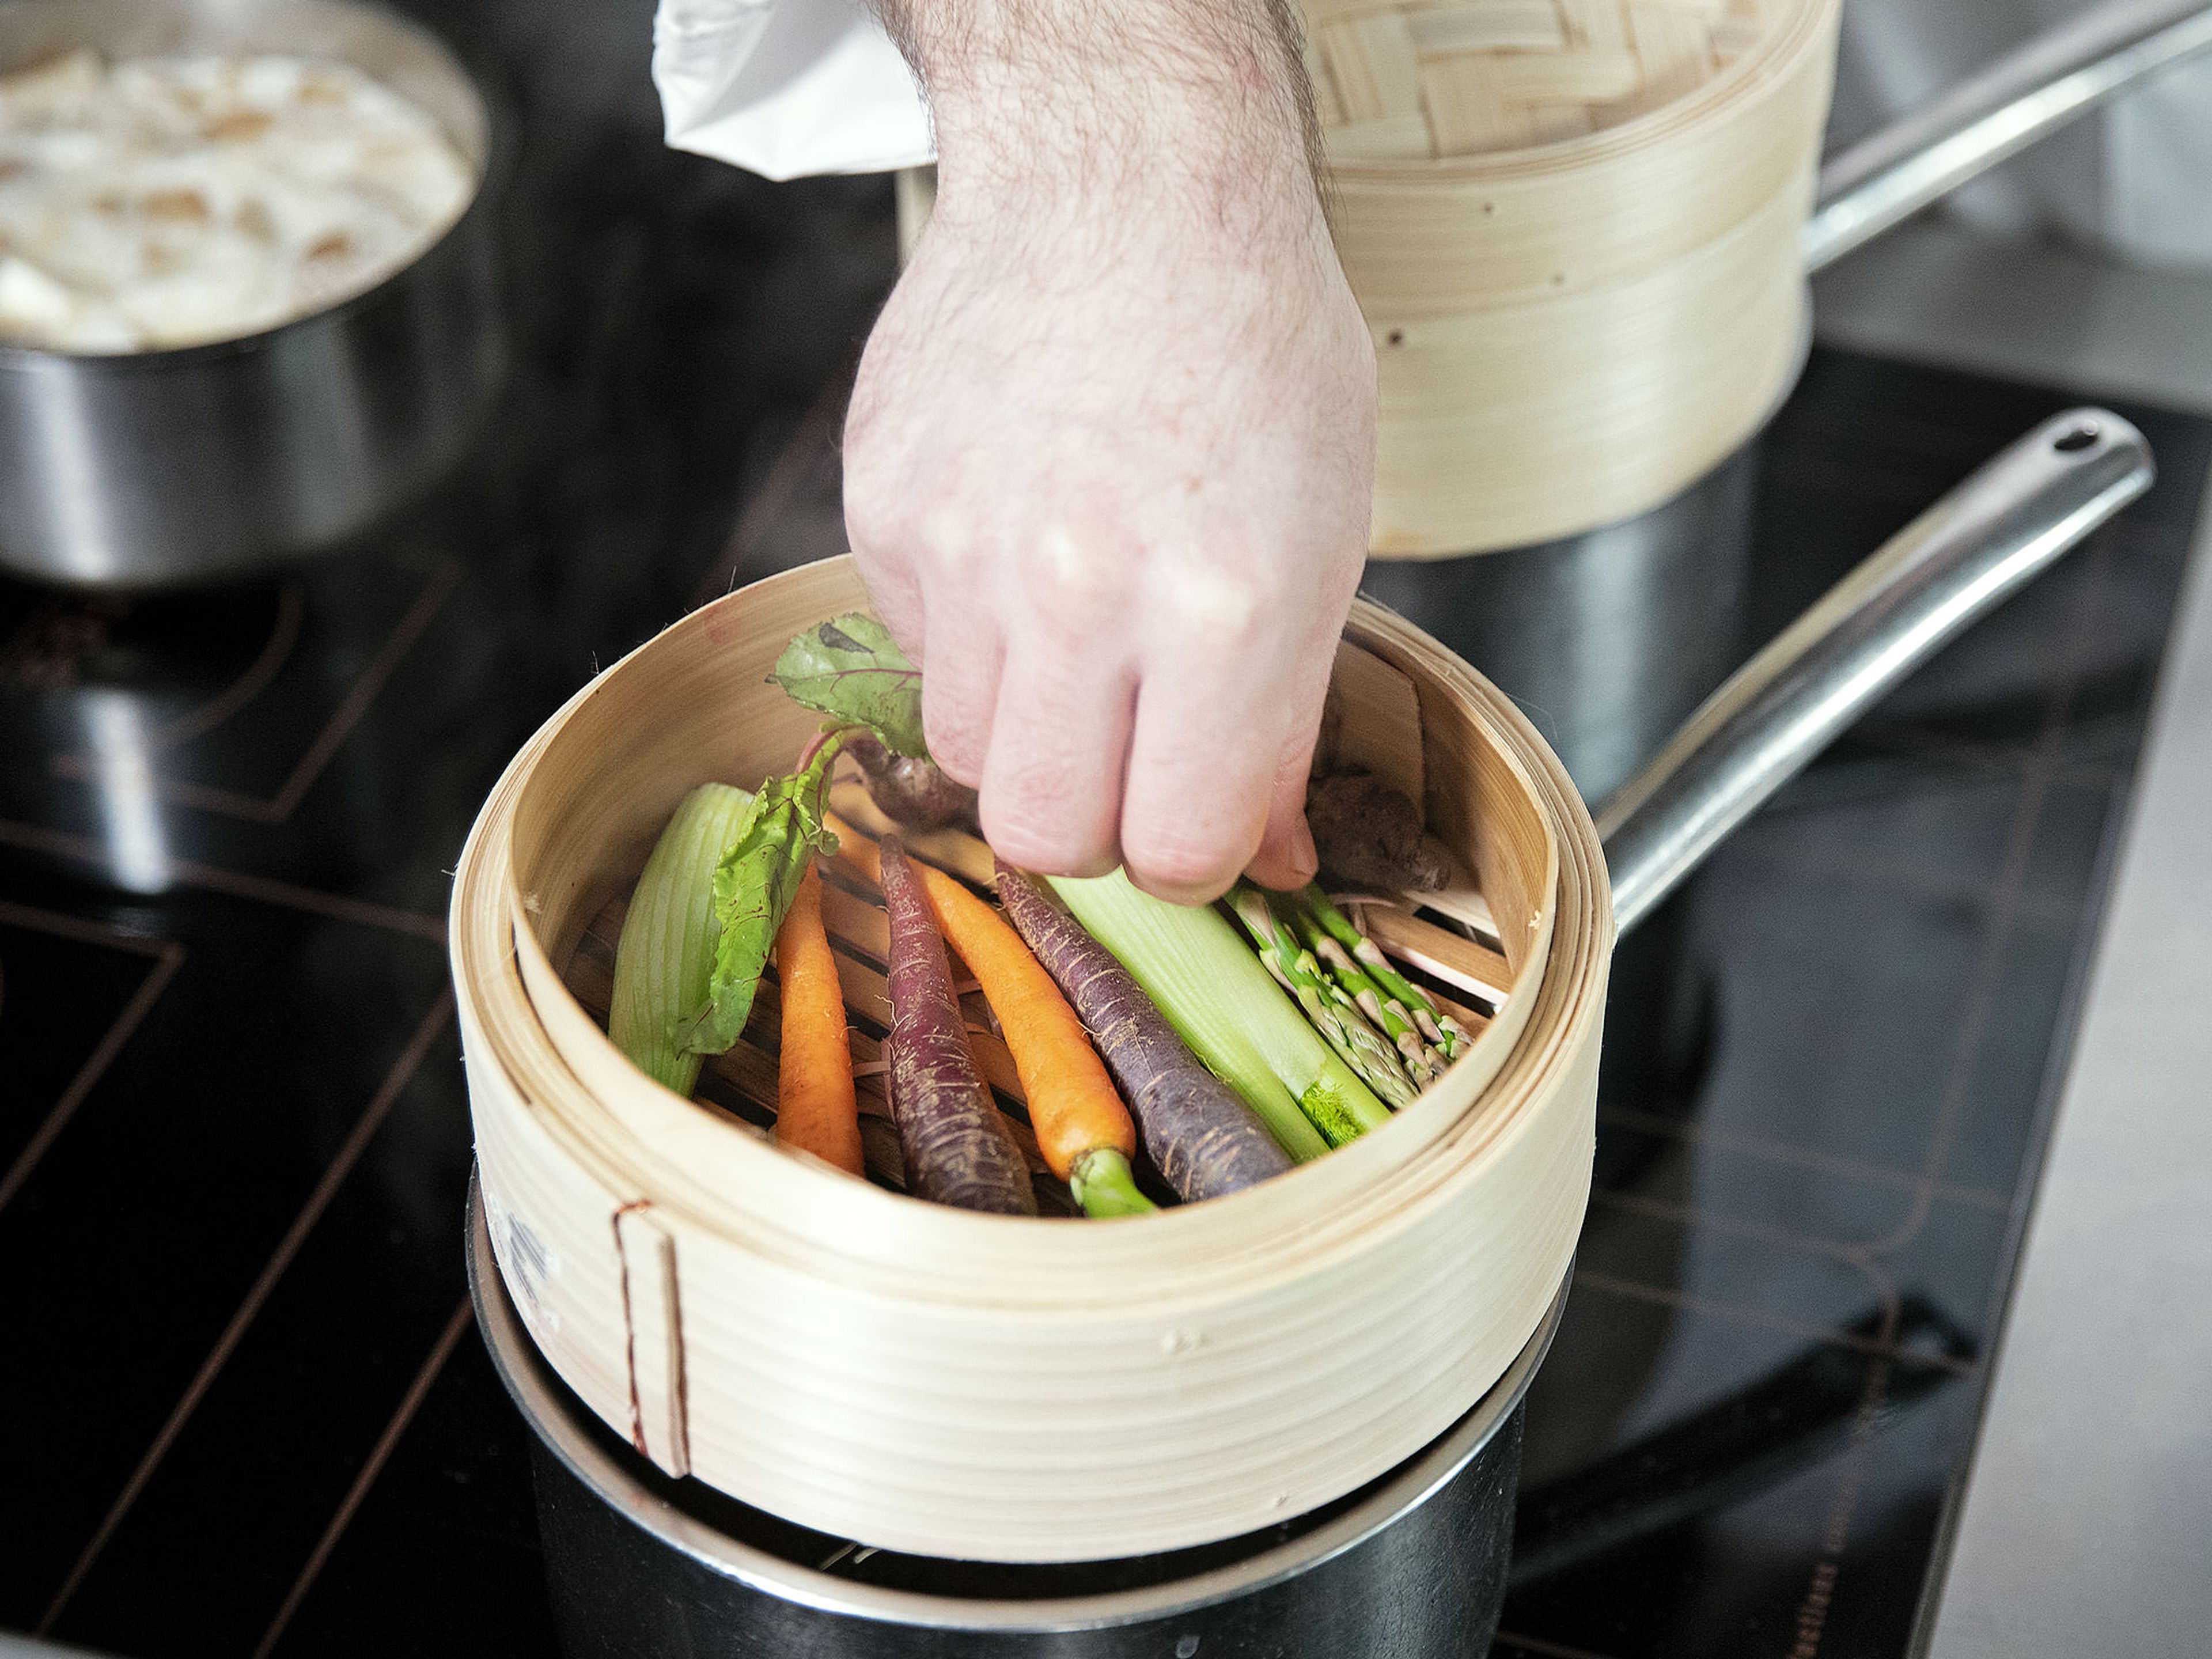 In two separate saucepans, each with a bamboo steamer on top, bring water to a boil. Prepare baby red peppers, baby zucchinis, baby corns, shiitake mushrooms, baby carrots, baby bok choy, baby fennel, and green asparagus. Add all vegetables to the bamboo steamers and steam for approx. 12 min.